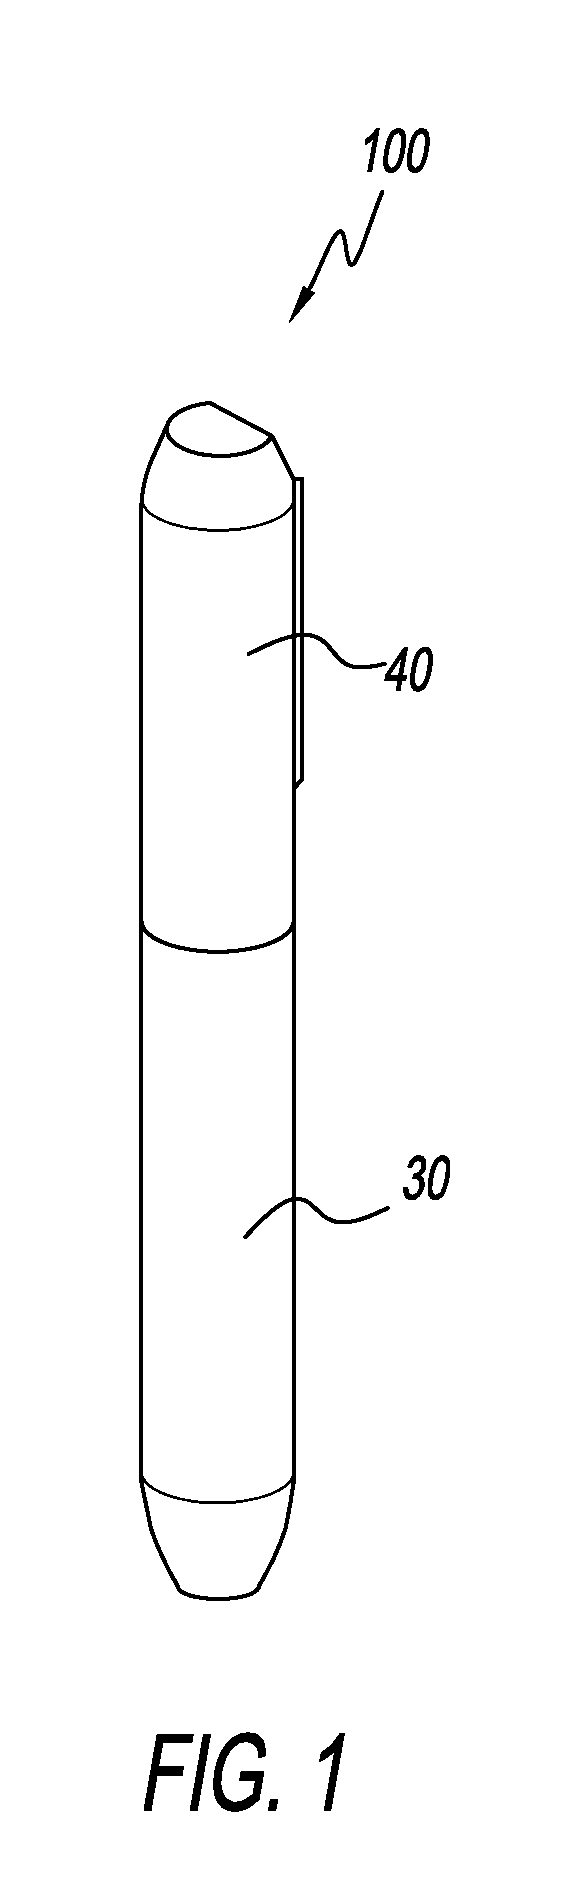 Apparatus For Preventing And Correcting Pseudofolliculitis Barbae, Pseudofolliculitis Pubis, And Pseudofolliculitis Nuchae